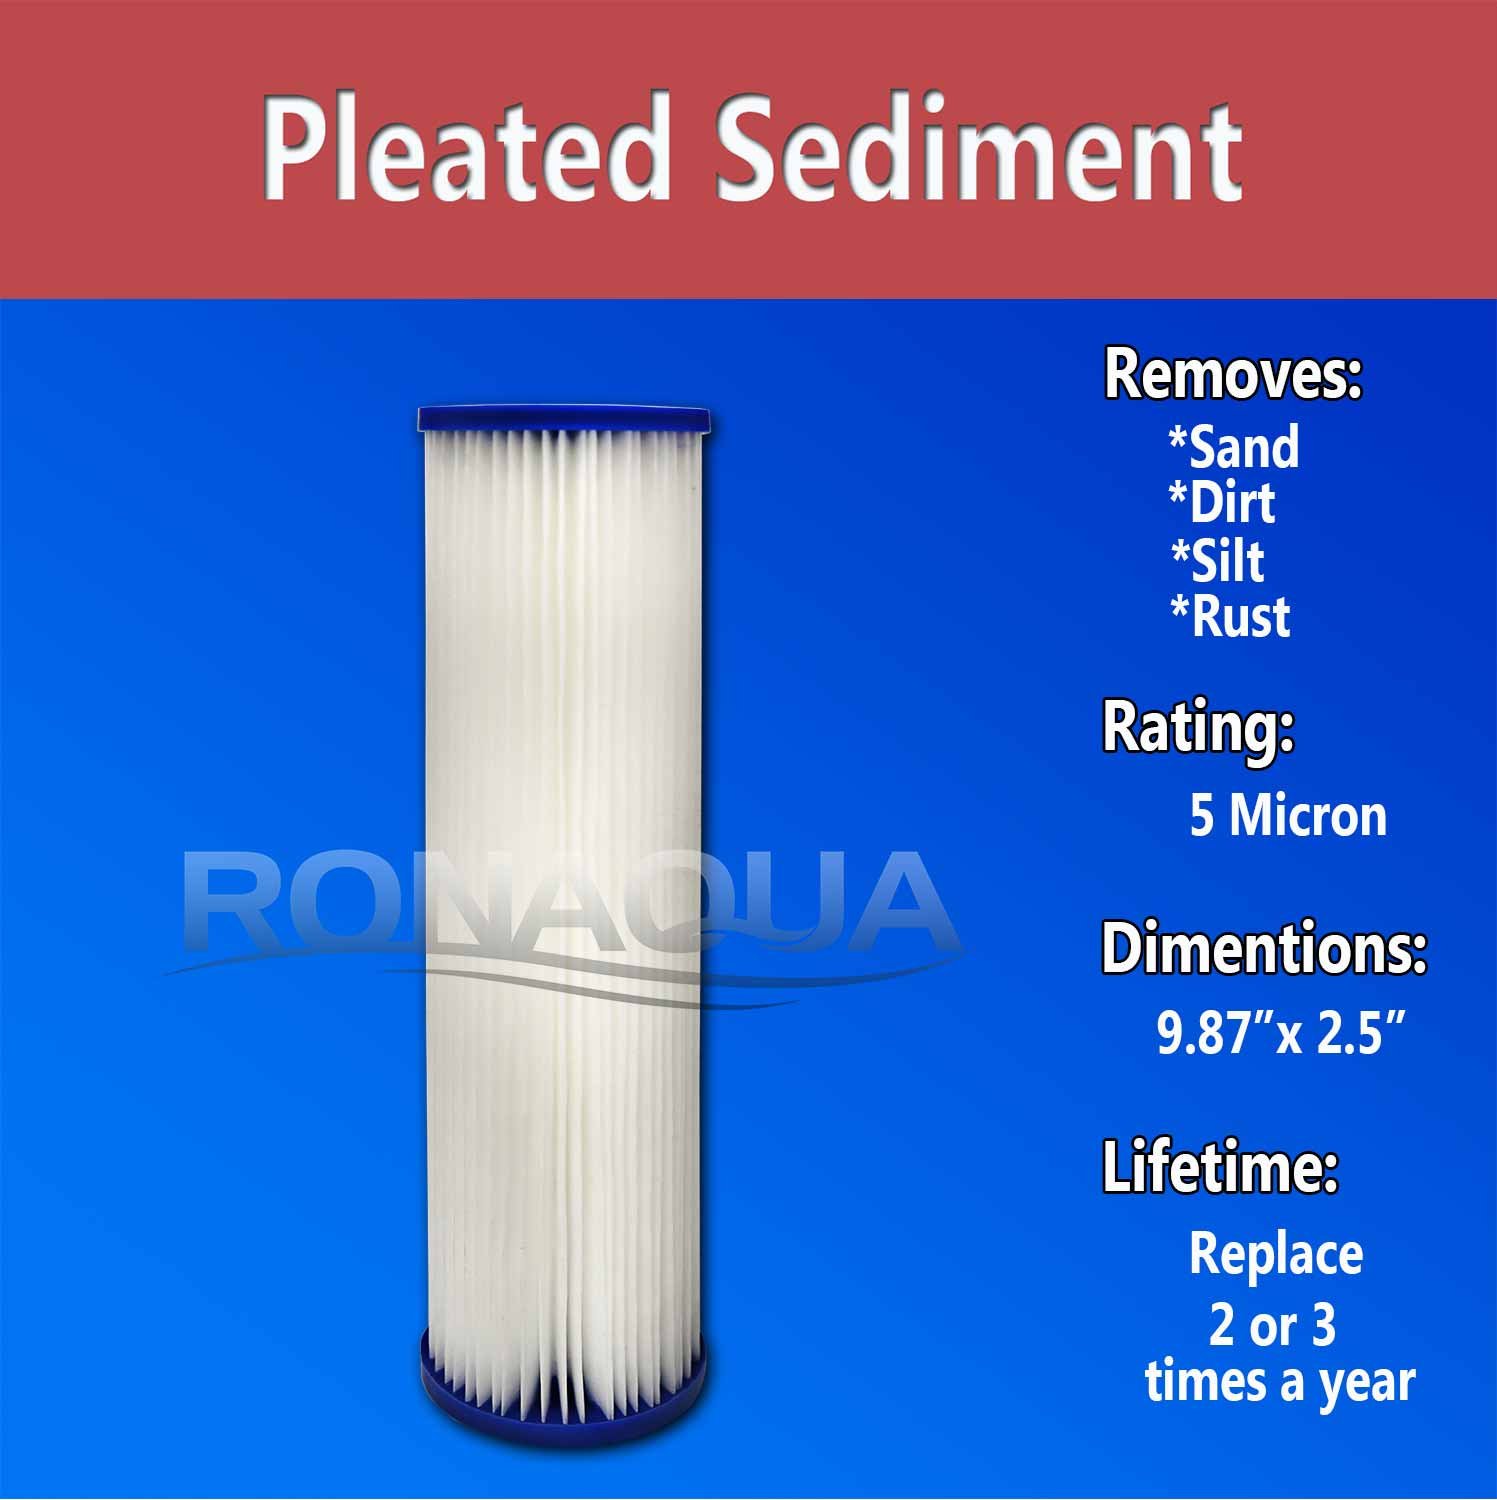 Ronaqua 6 Pleated Sediment Water Filter Cartridge 9.87”x 2.5” Amplified Surface Area, Removes Sand, Dirt, Rust, Extended Filter Life WELL-MATCHED with WHKF-WHPL, 801-50, WB-50W, WFPFC3002, SPC-25-1050